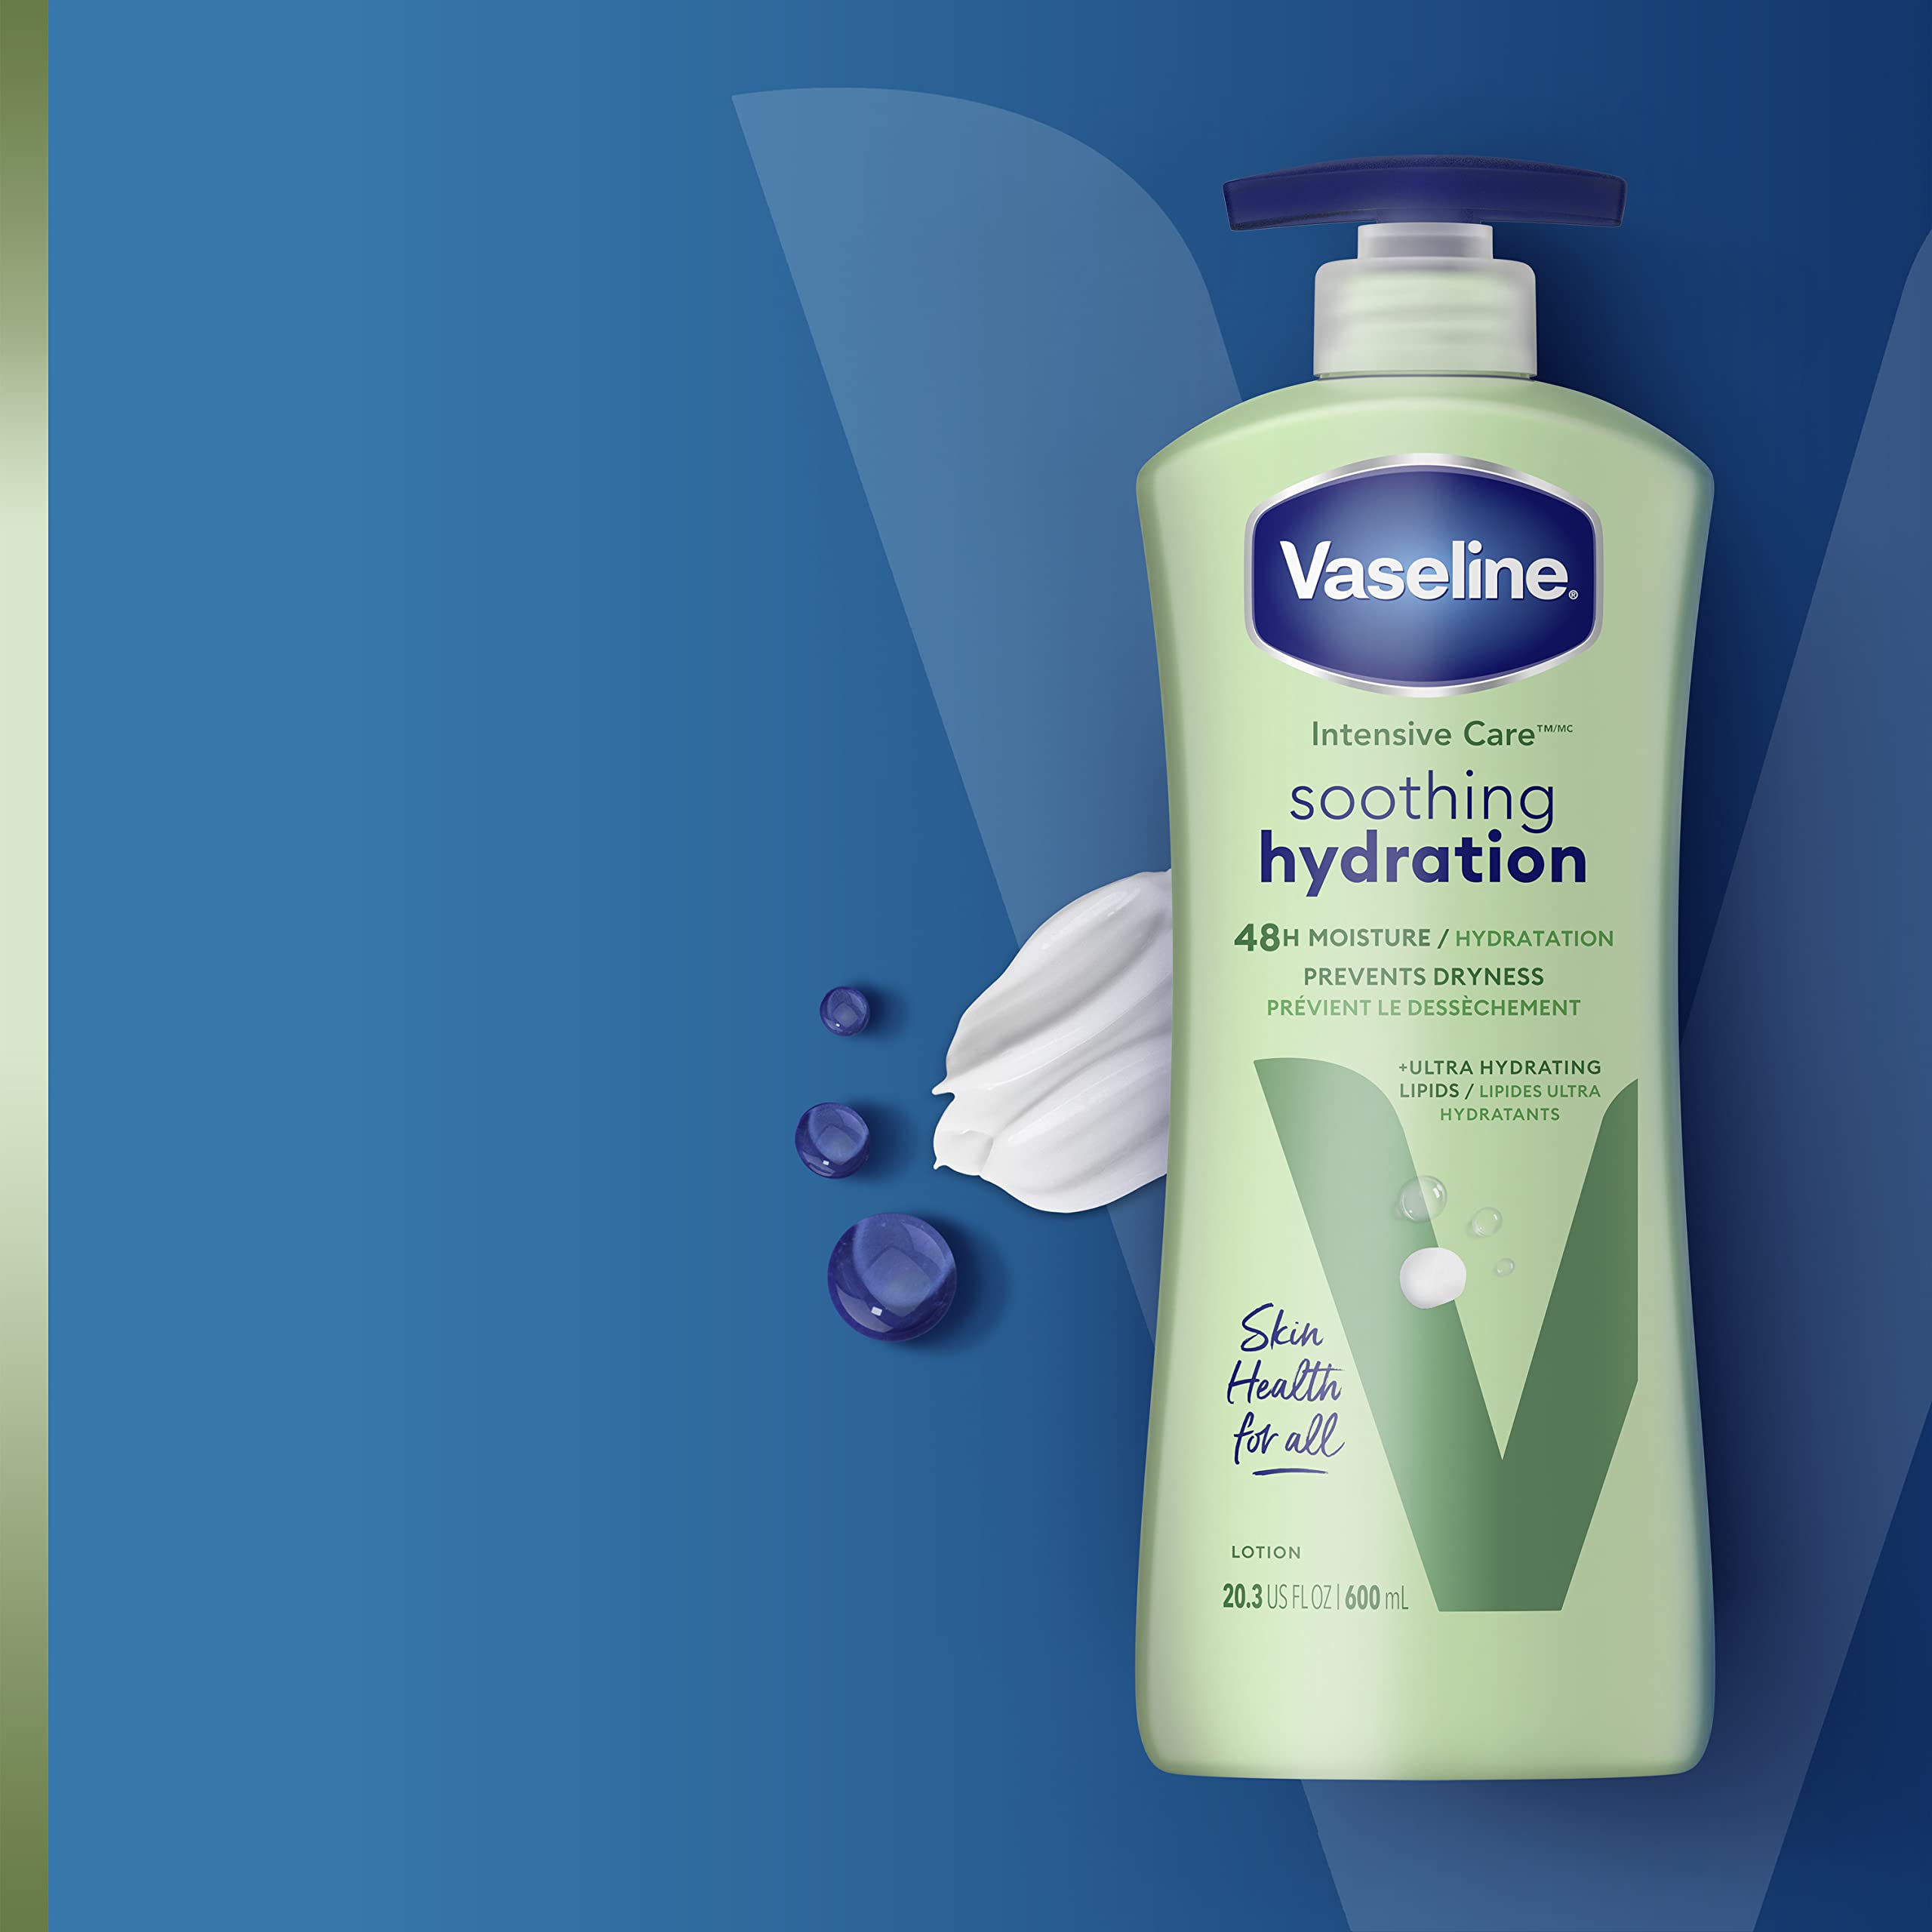 Vaseline Intensive Care Body Lotion for Dry Skin Soothing Hydration Lotion Made with Ultra-Hydrating Lipids + 1% Aloe Vera Extract to Refresh Dehydrated Skin 20.3 oz, Pack of 3